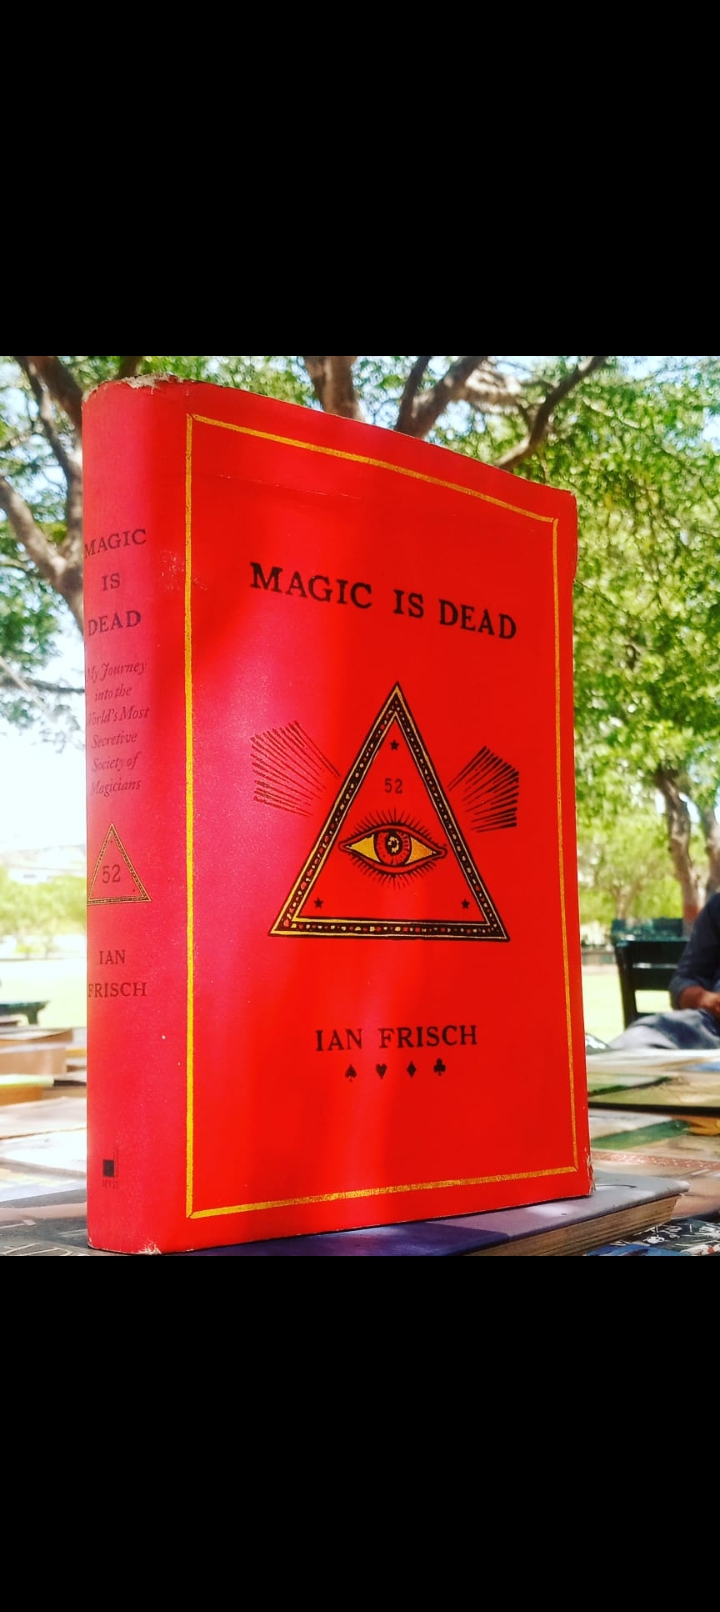 magic is dead. my journey into the world's most secretive society of magicians by ian frisch. origin